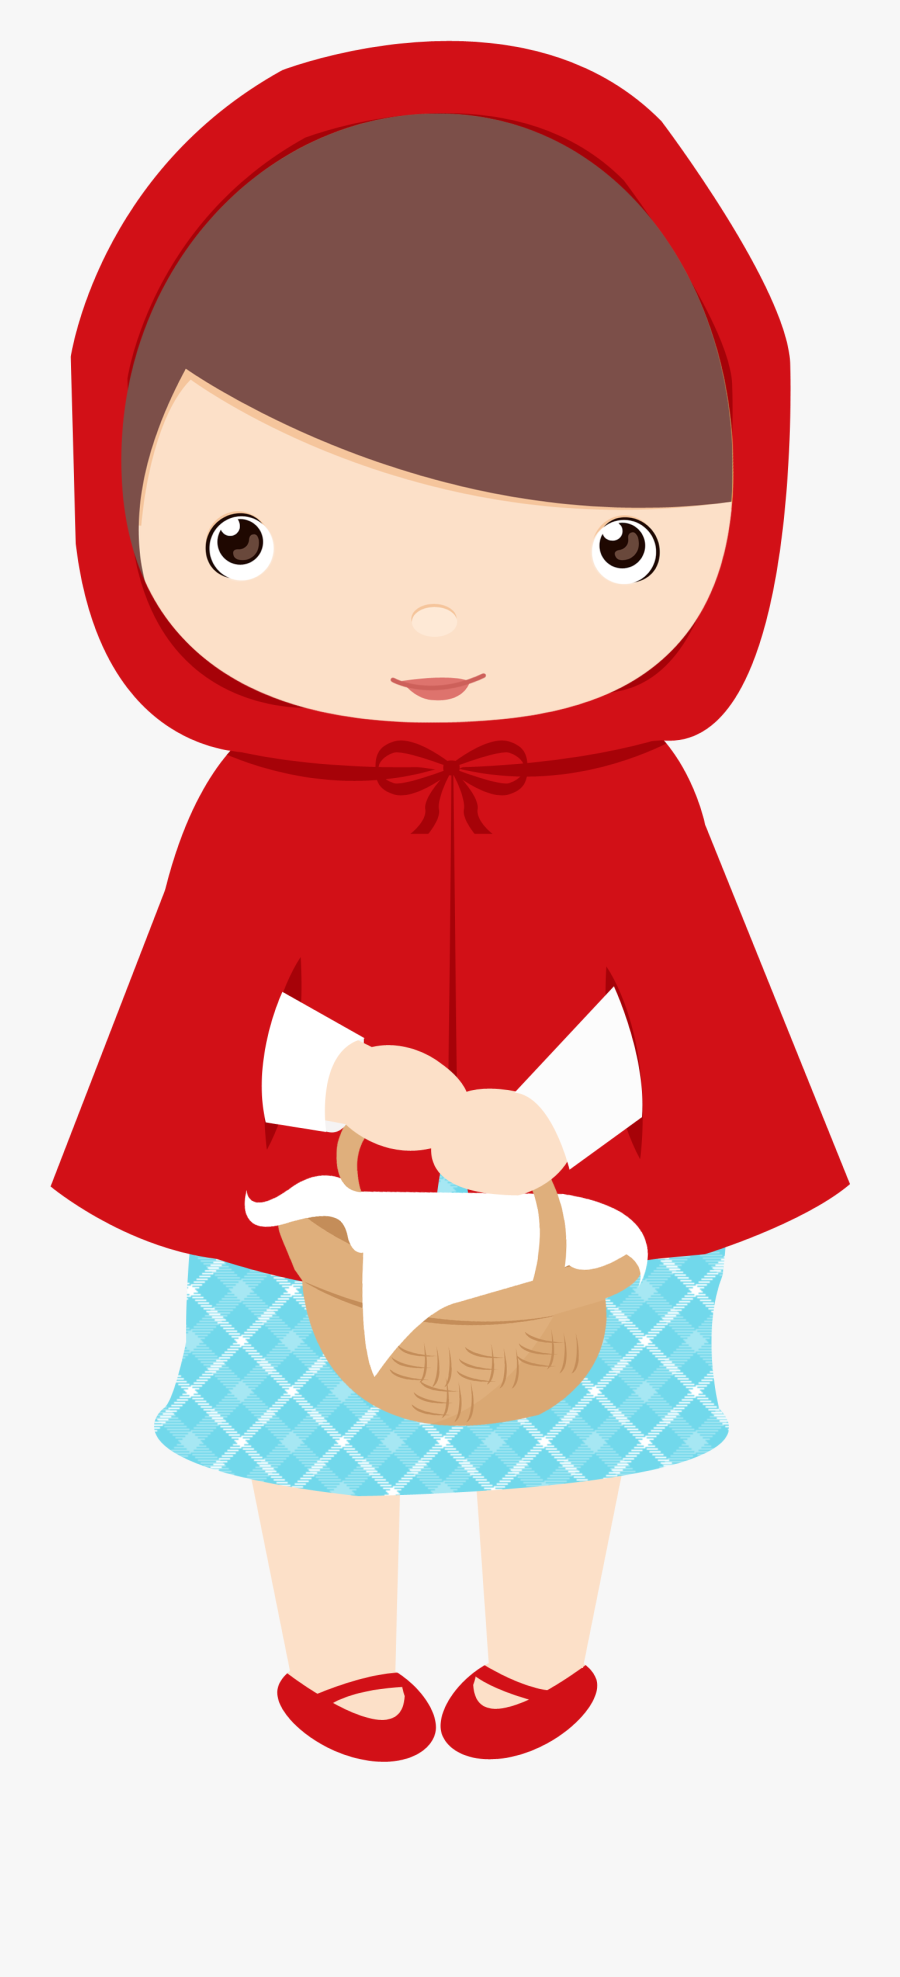 Clipart House Red Riding Hood - Clipart Little Red Riding Hood, Transparent Clipart